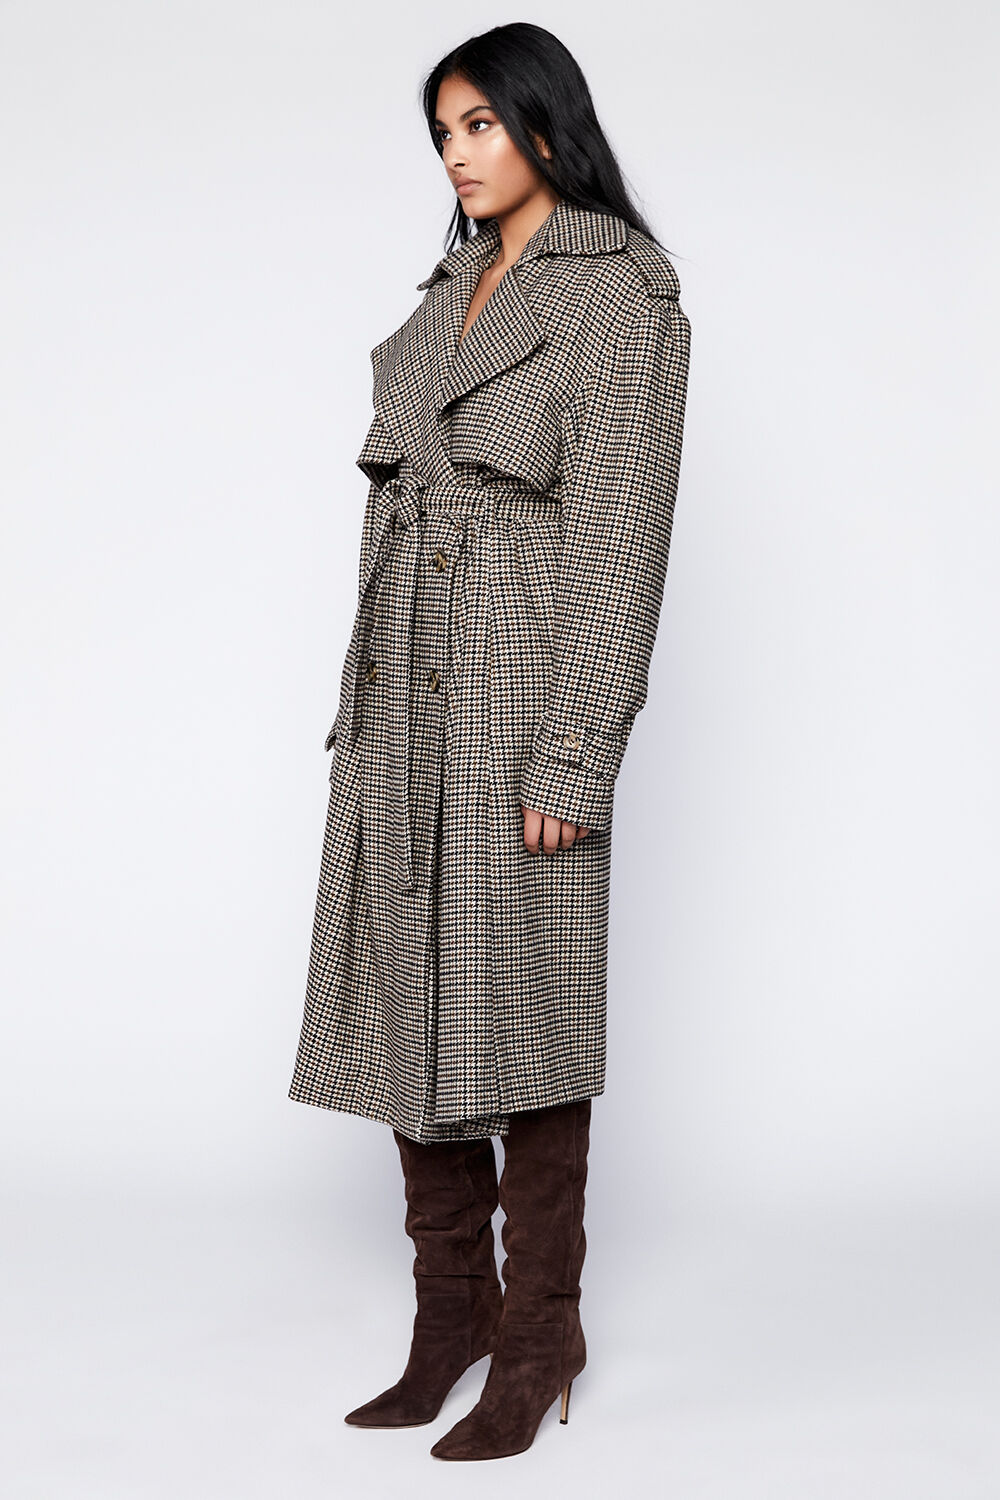 OVERSIZED CHECK TRENCH in colour TOBACCO BROWN